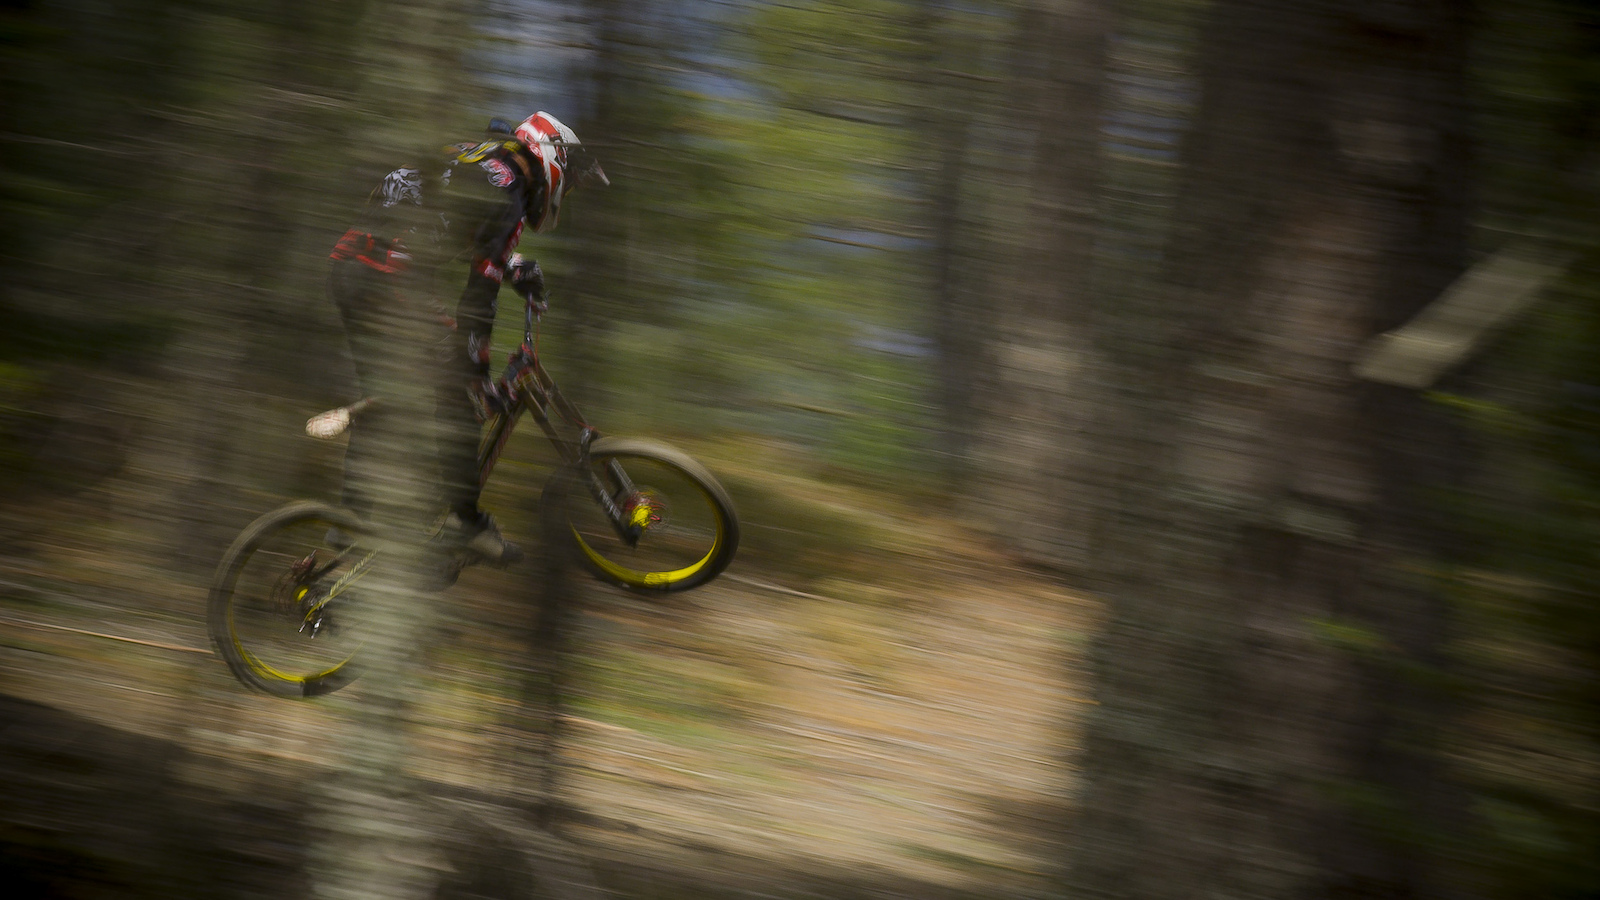 Fab and Cedric share "la vie MTB" in Ced's chosen land of terrain and trail.